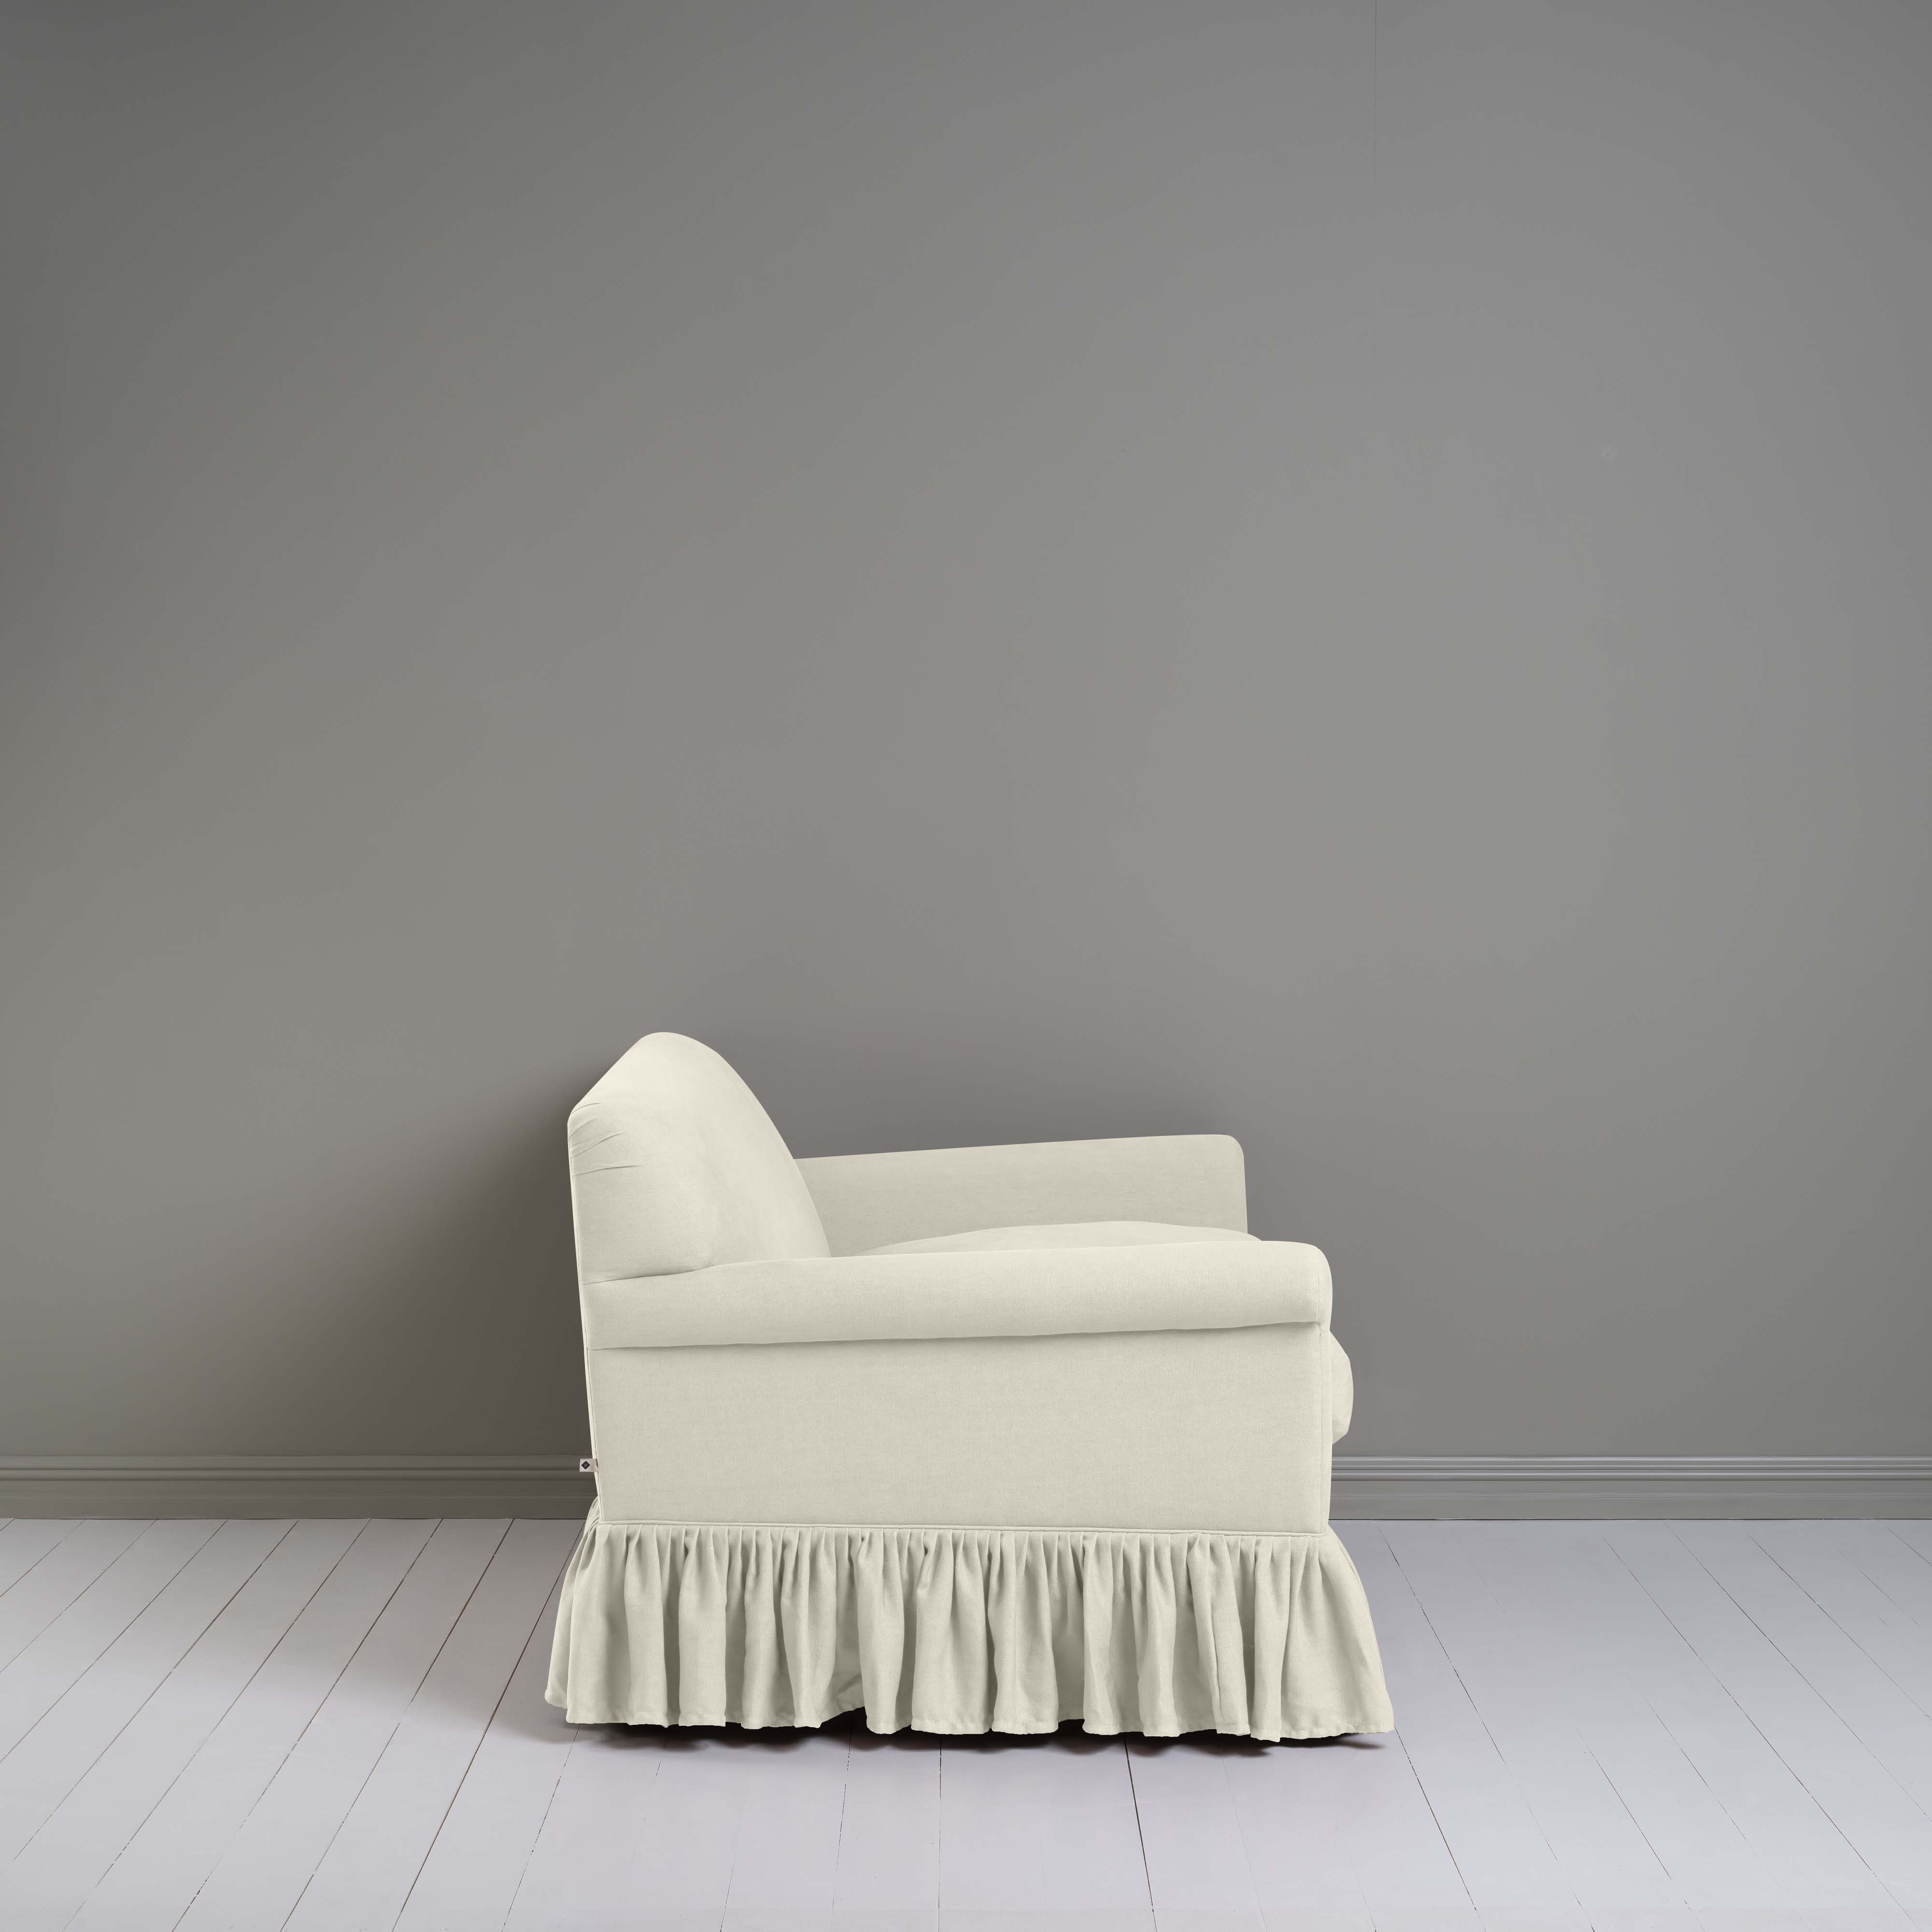  Curtain Call 2 Seater Sofa in Laidback Linen Dove 